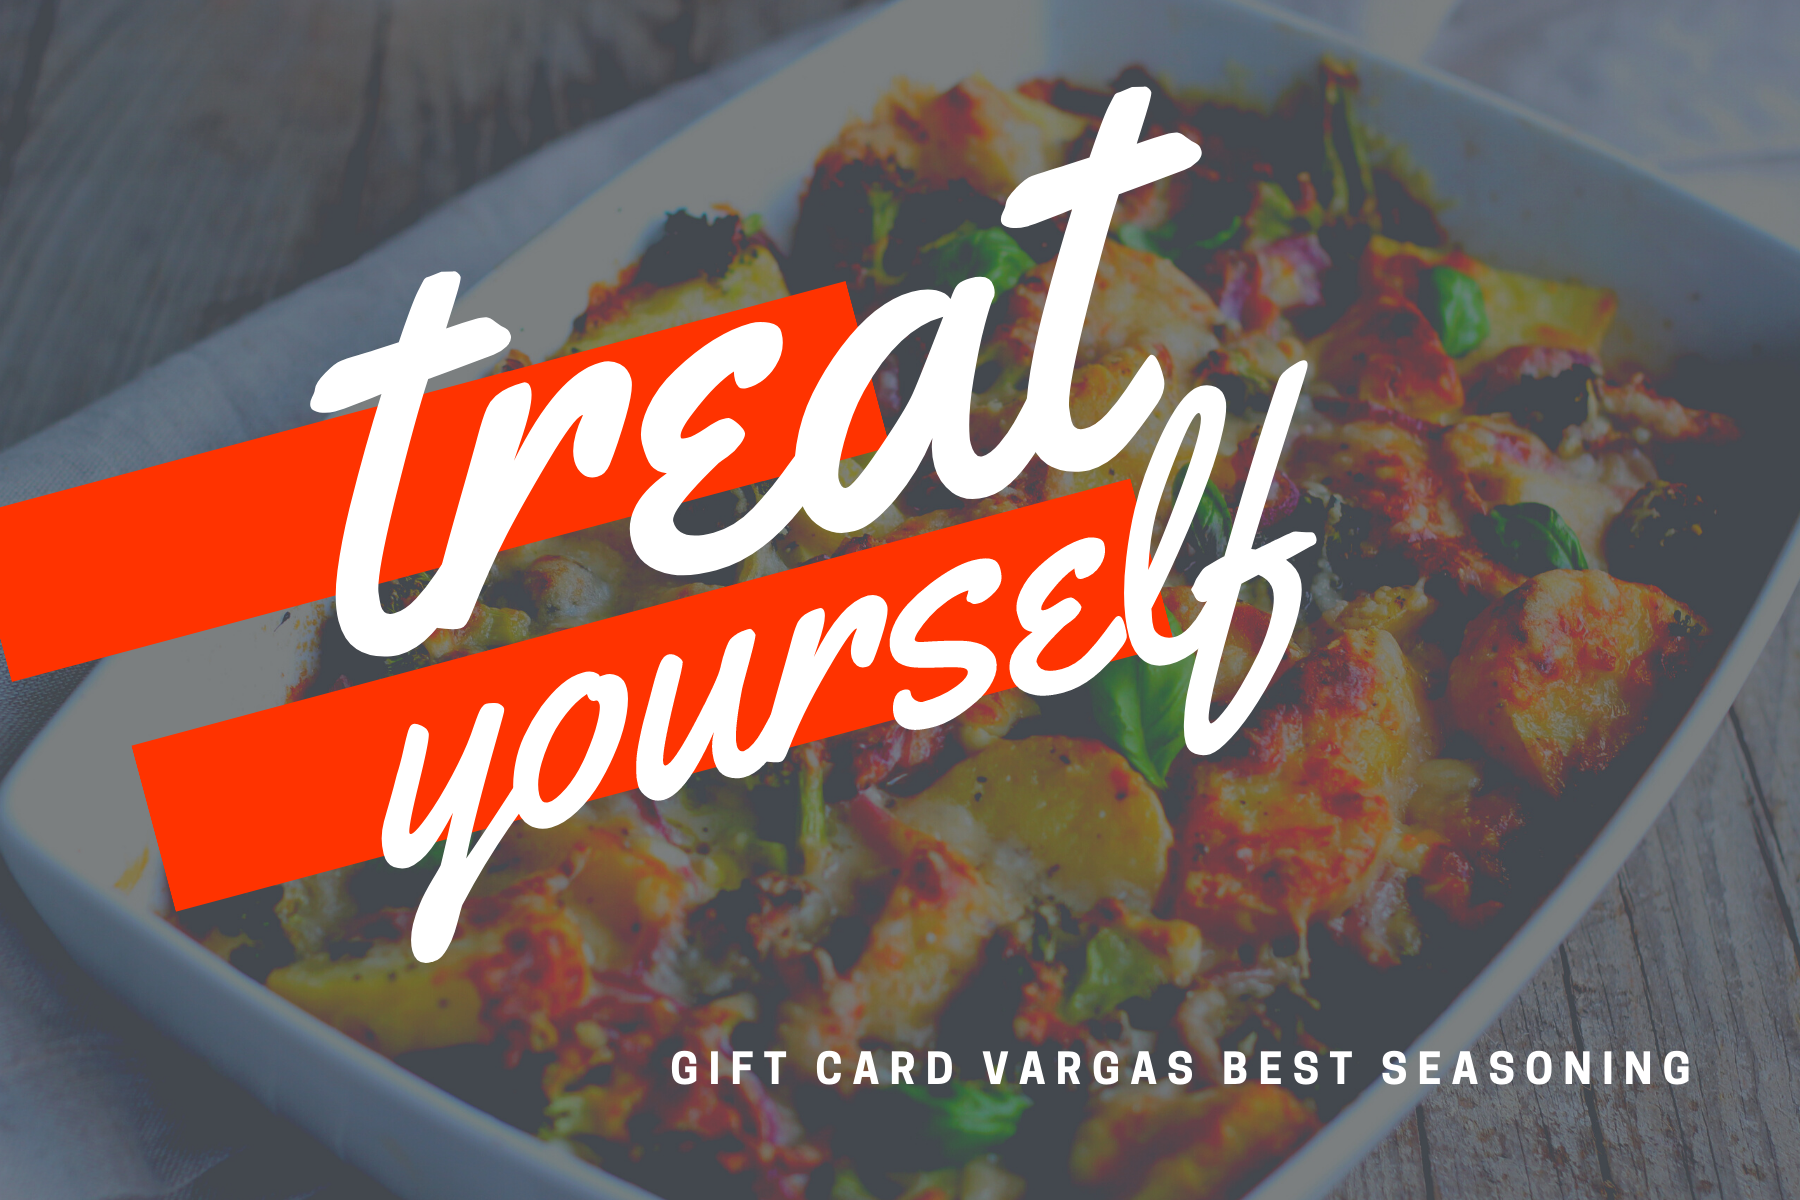 gift card for Treat Yourself best seasoning best healthy low sodium 100% All Natural ingredients